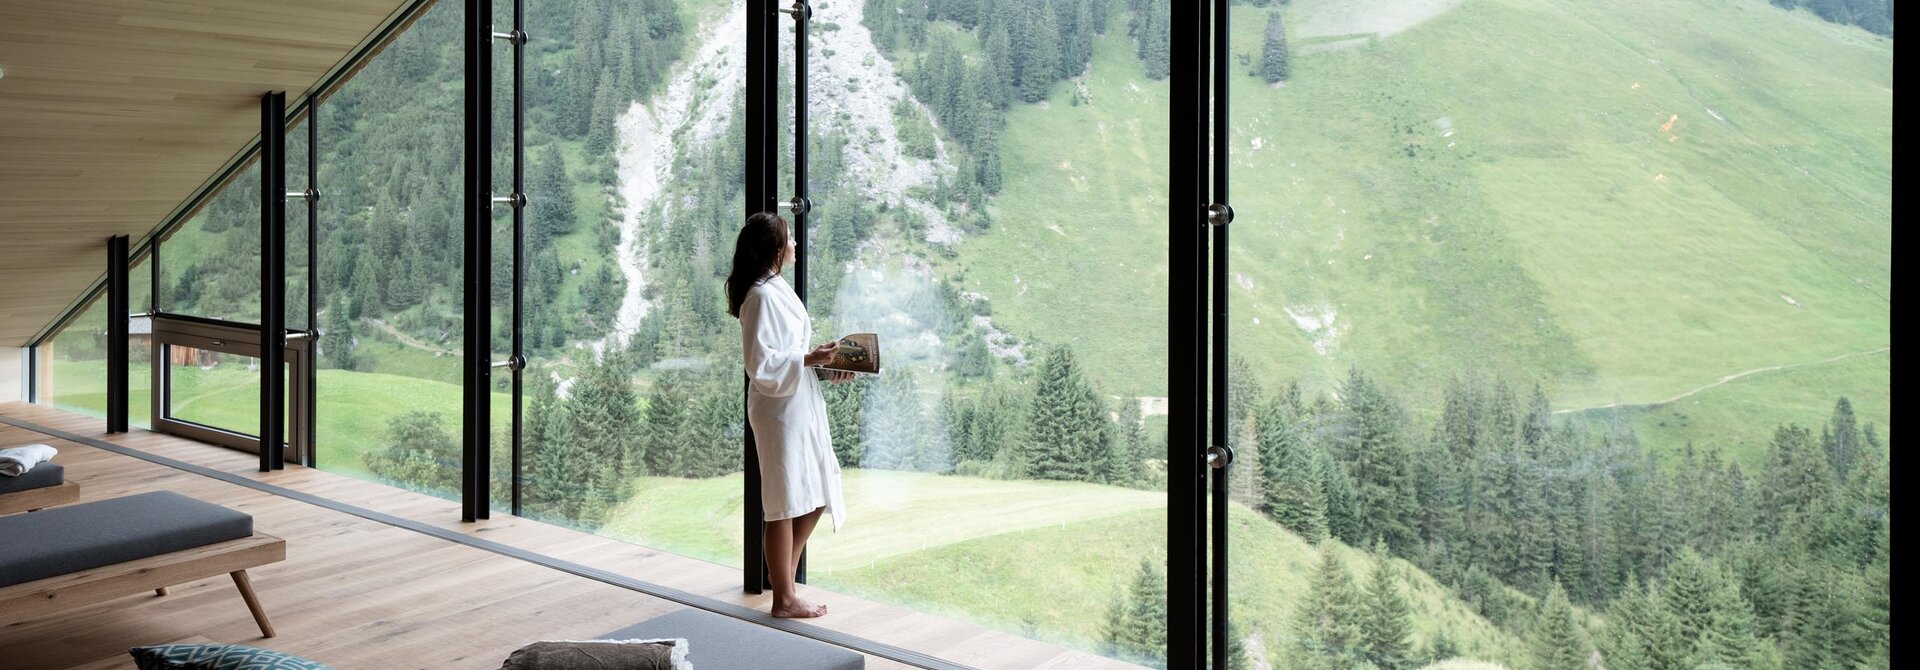 Relaxation room in the middle of the mountain world | Wellnesshotel Arlberg